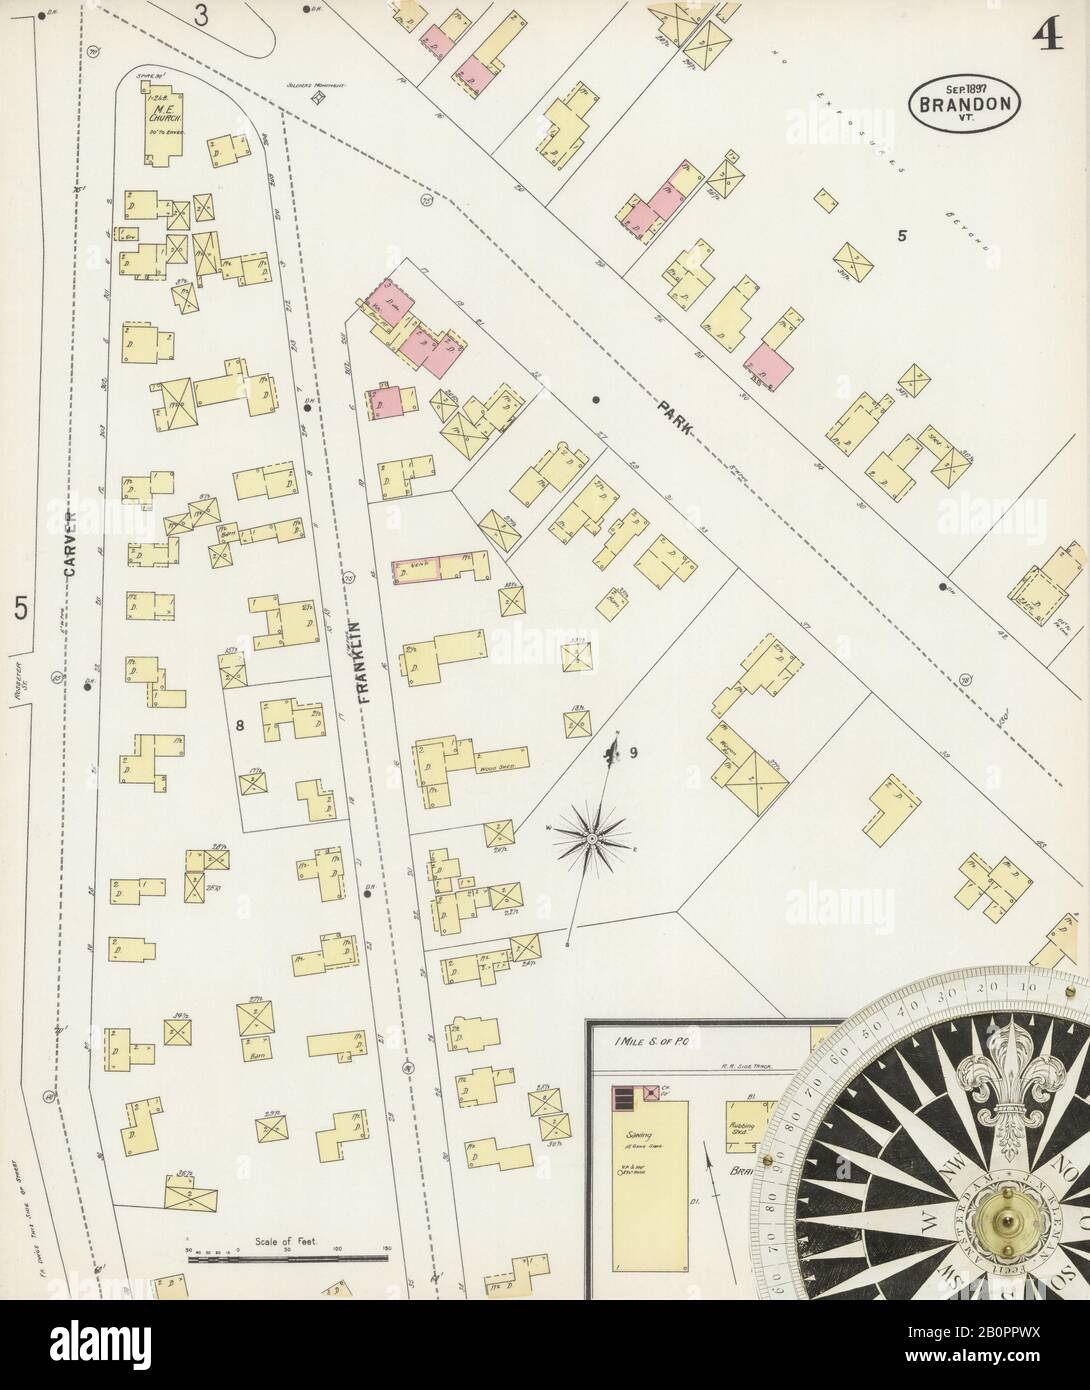 Image 4 of Sanborn Fire Insurance Map from Brandon, Rutland County, Vermont. Sep 1897. 5 Sheet(s), America, street map with a Nineteenth Century compass Stock Photo